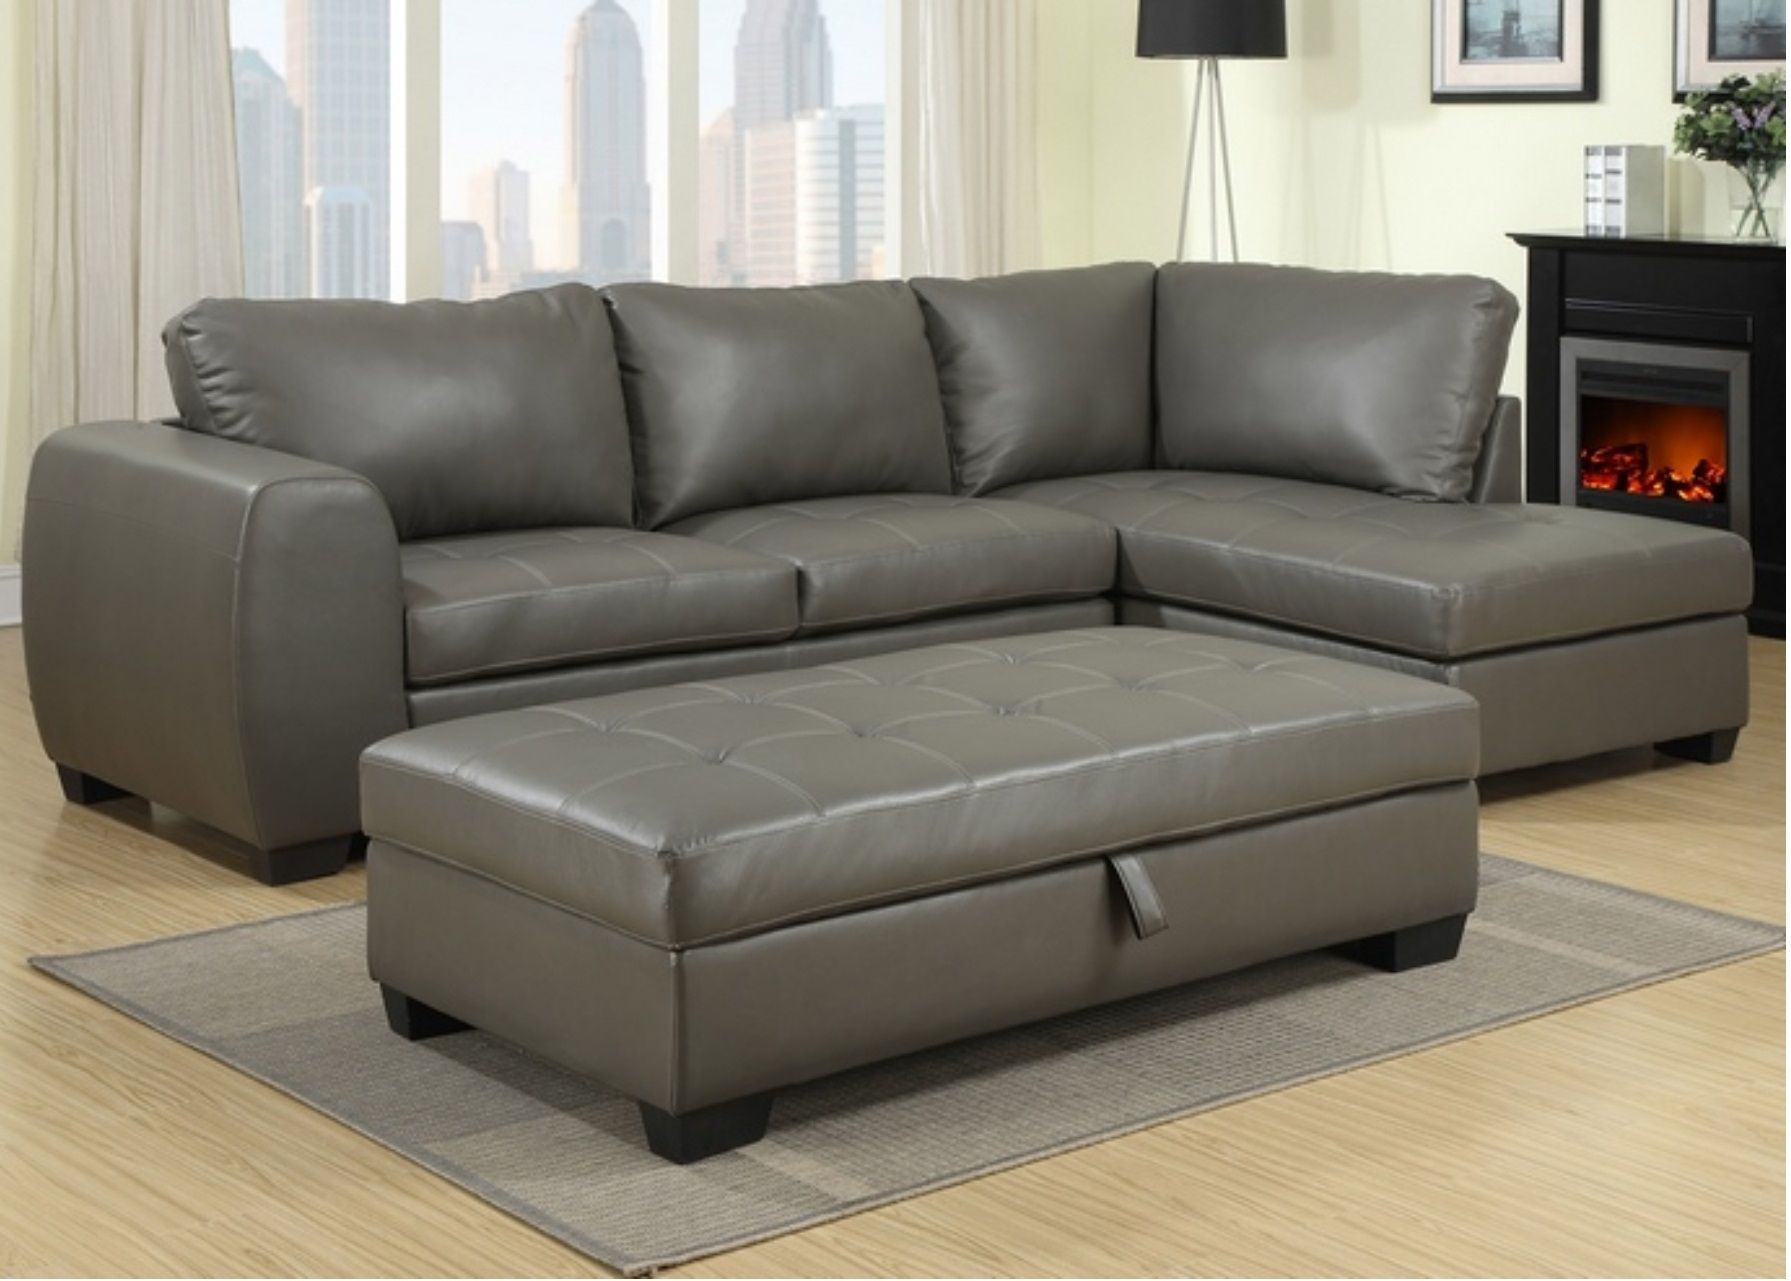 Sectional Couch Bluetonrniture Sets Sofa Inches Day Fiance With Regard To Kijiji Calgary Sectional Sofas (View 6 of 10)